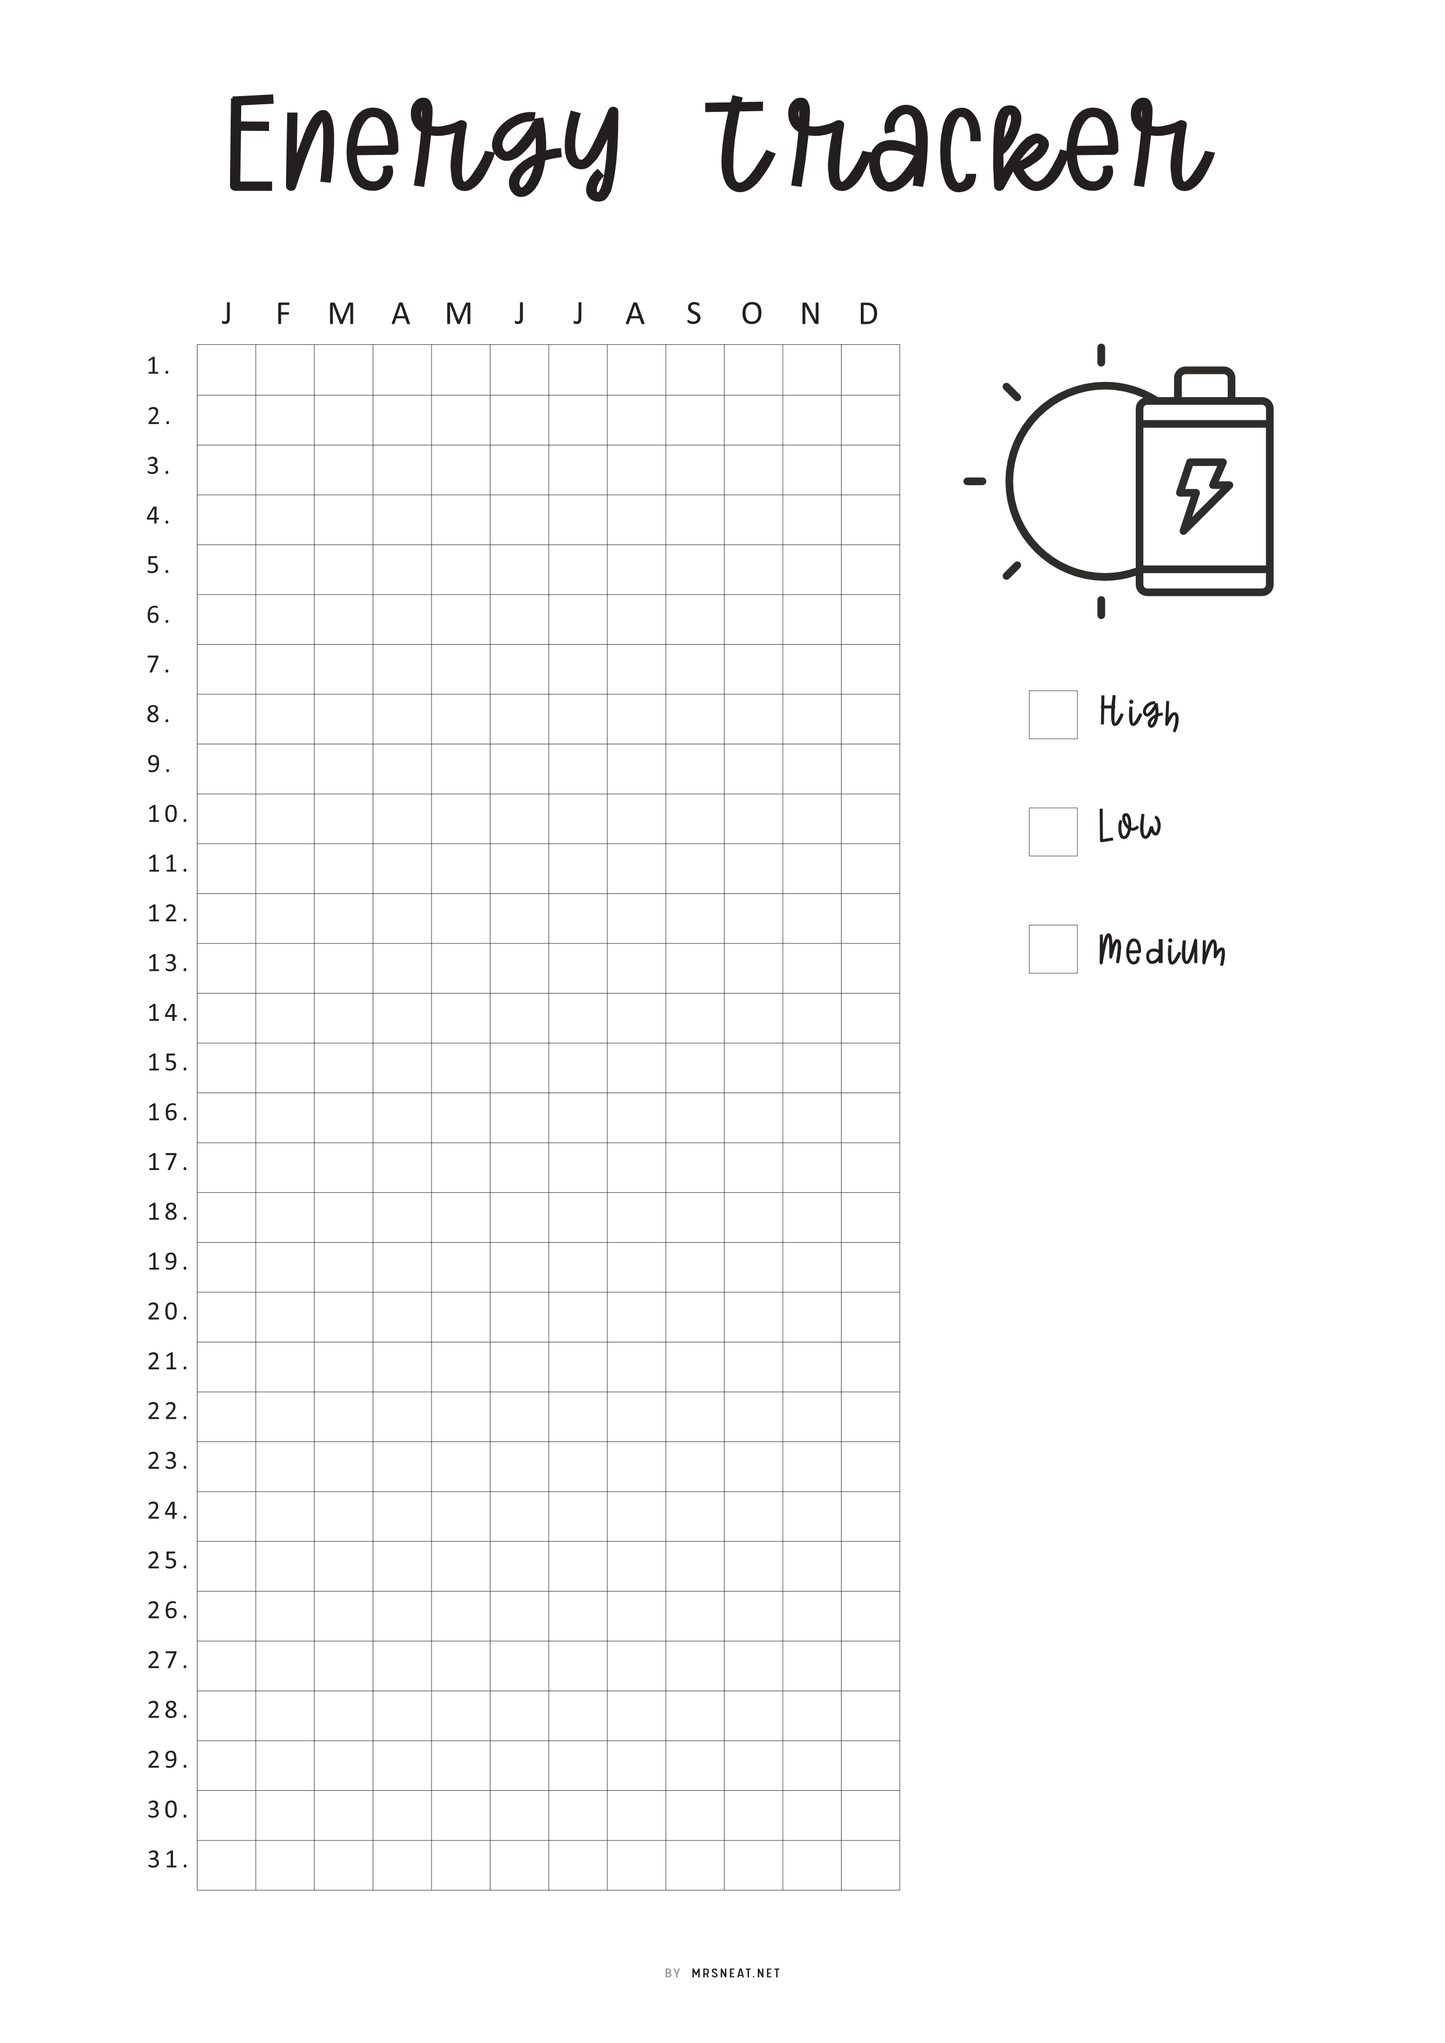 Yearly Energy Tracker Template, Energy Level Template PDF, Mood Tracker, Health Journal, Health Log, Health Tracker Template, A4, A5, Letter, Half Letter, PDF, 2 versions